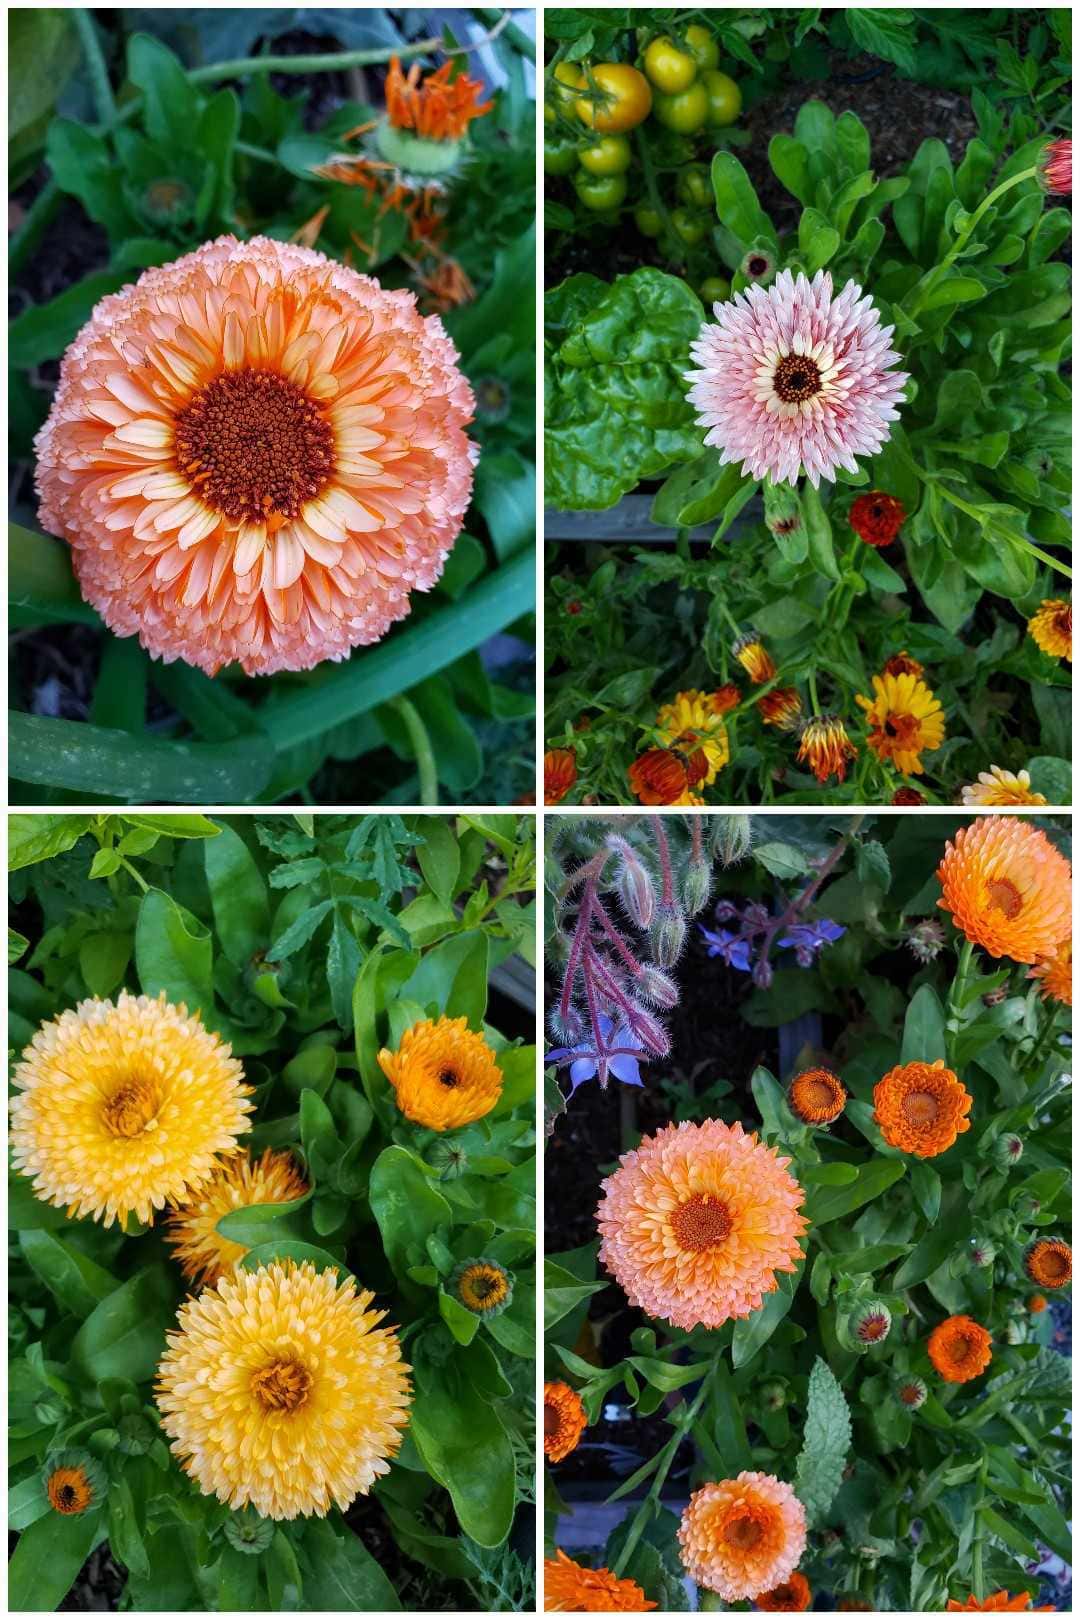 Four images of different types of calendula. Pink surprise is peachy-pink and has a large middle center. Apricot twist is light orange and more fluffy, with full petals. Strawberry blonde has a light yellow center with pink petals.